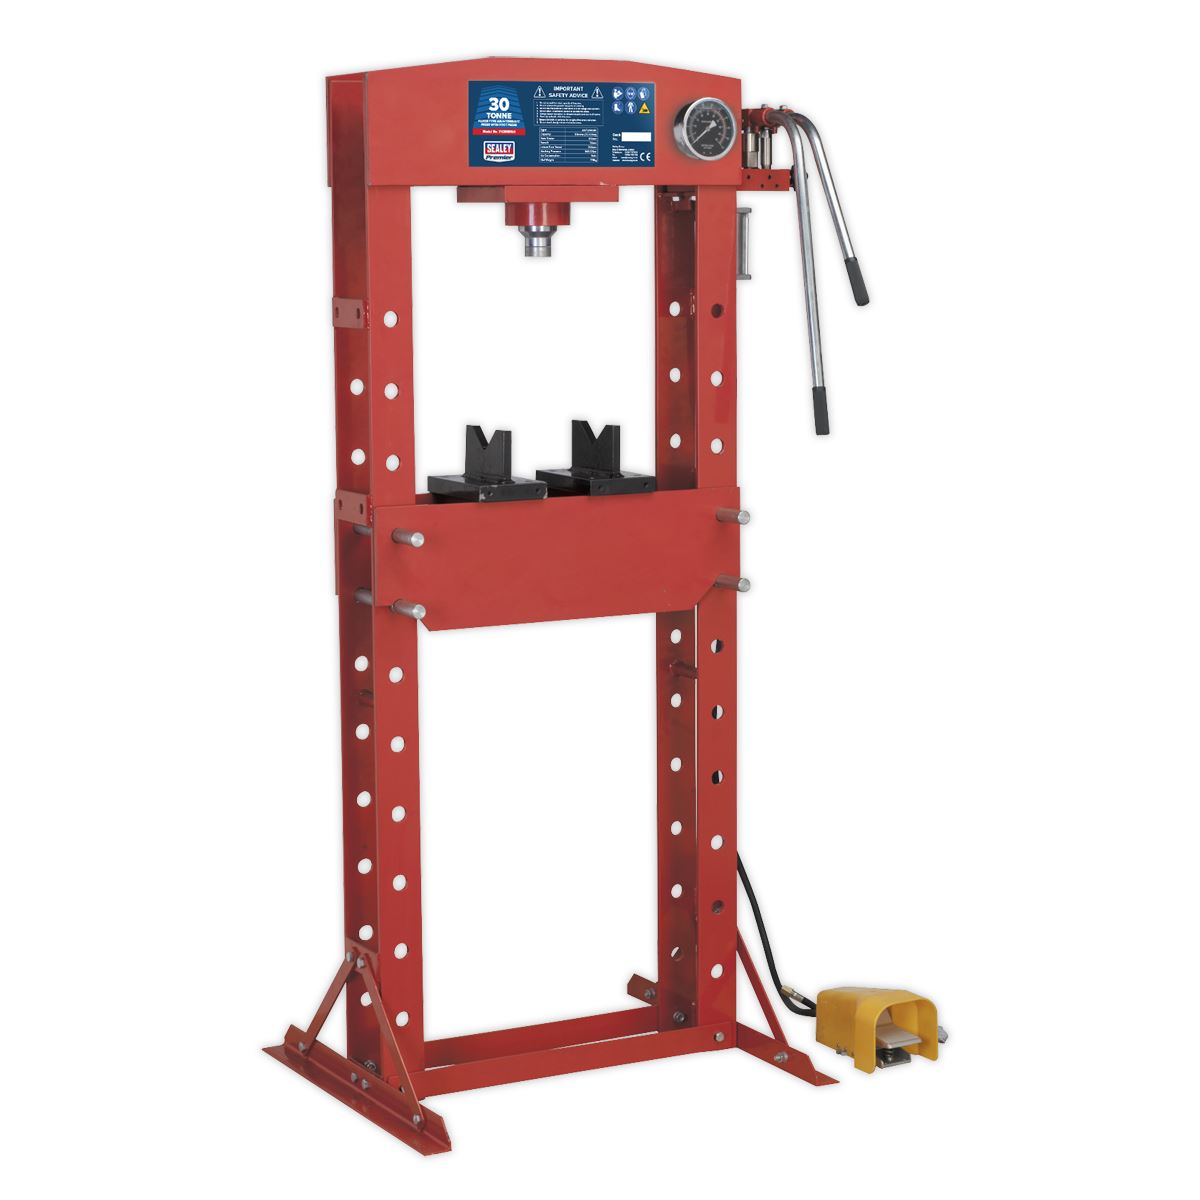 Sealey Premier Air/Hydraulic Press 30 Tonne Floor Type with Foot Pedal